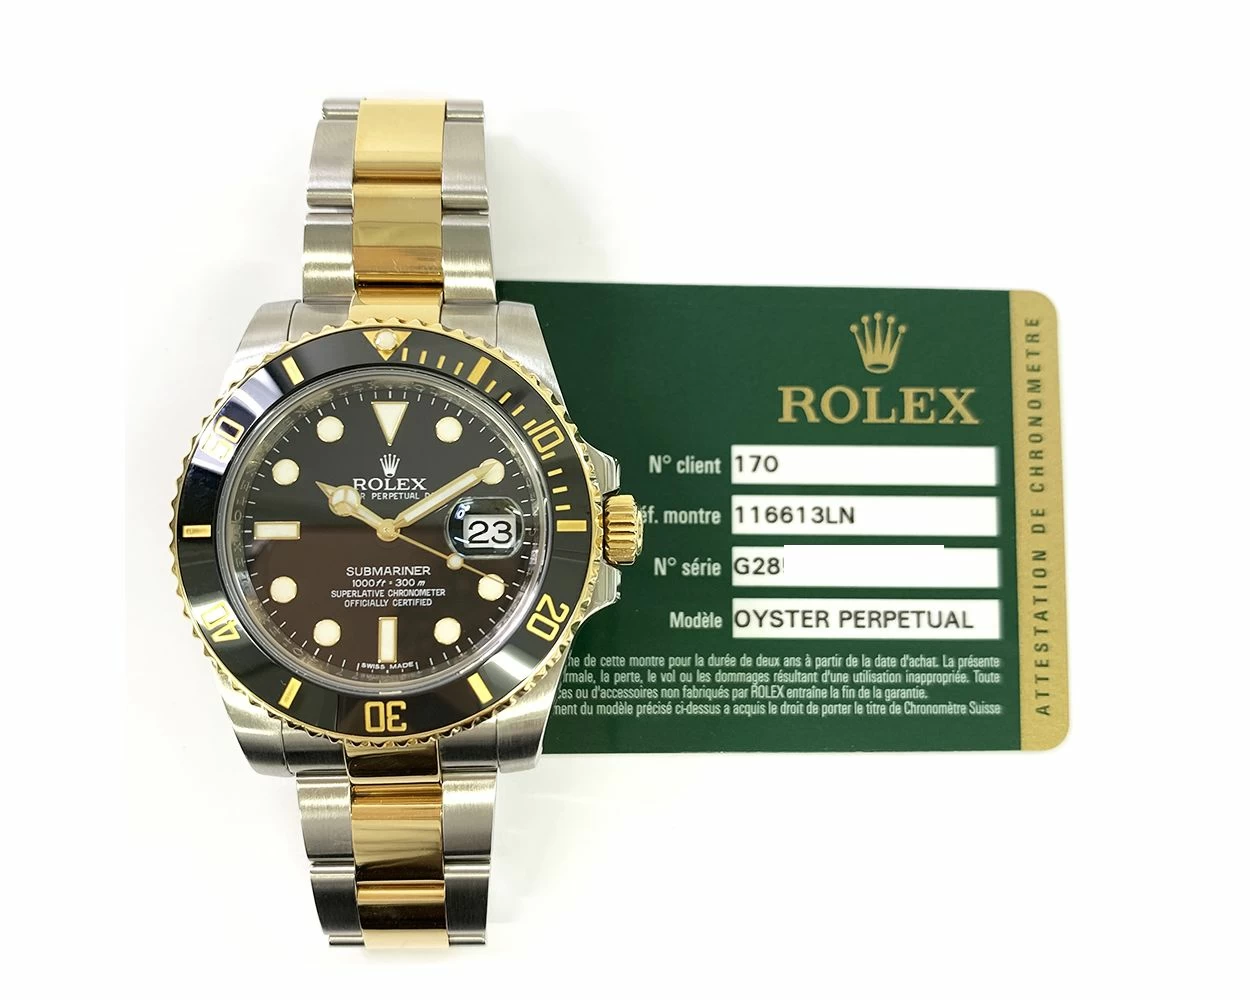 Rolex Submariner Date reference 116613LN